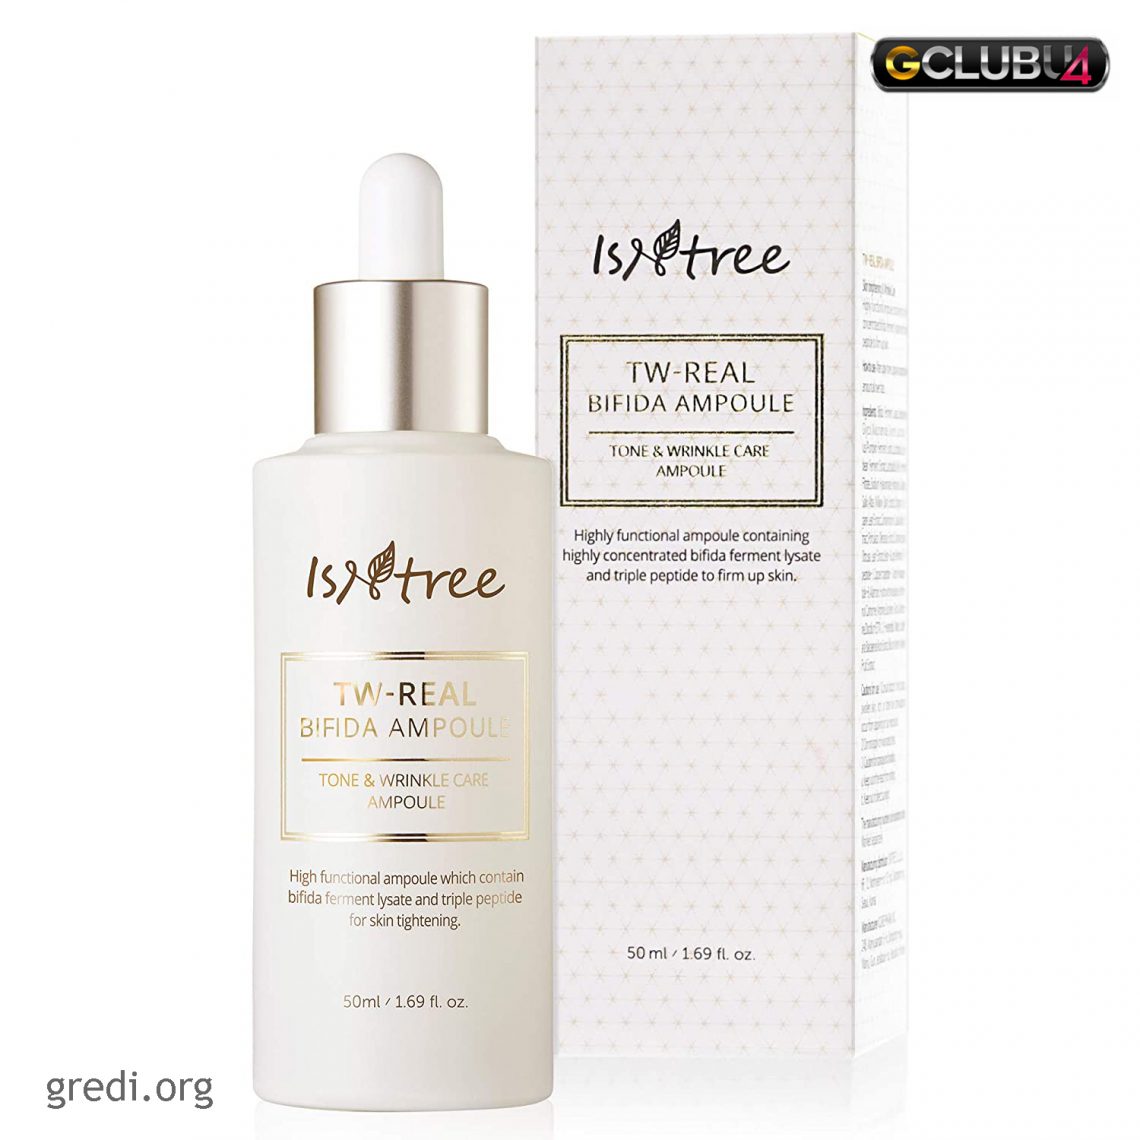 Isntree TW-REAL BIFIDA AMPOULE